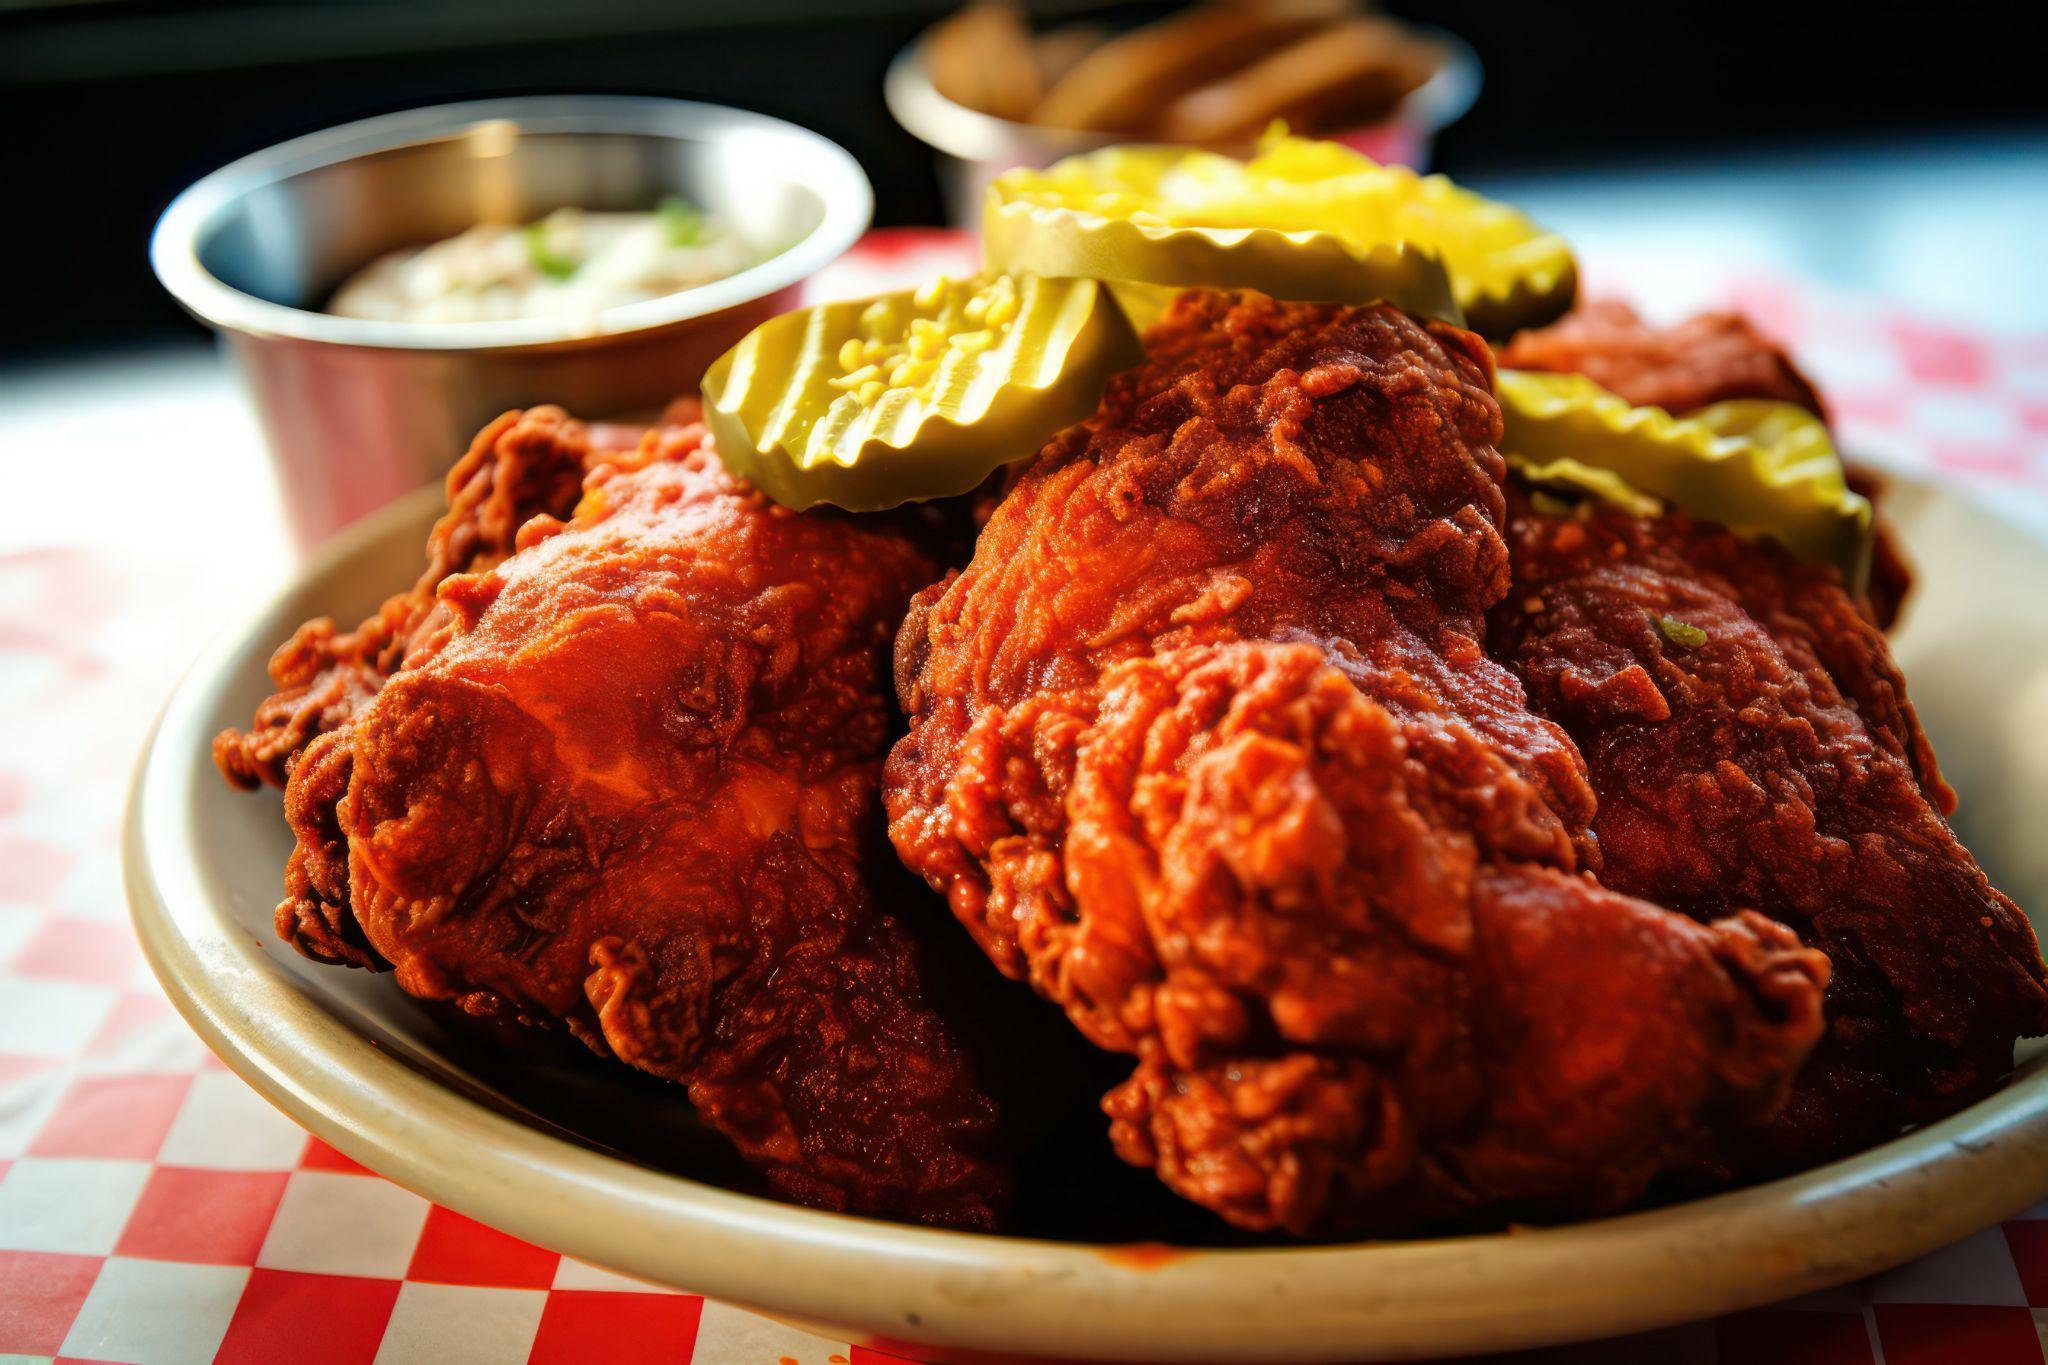 nashville hot fried chicken with pickle classic american fried chicken cuisine